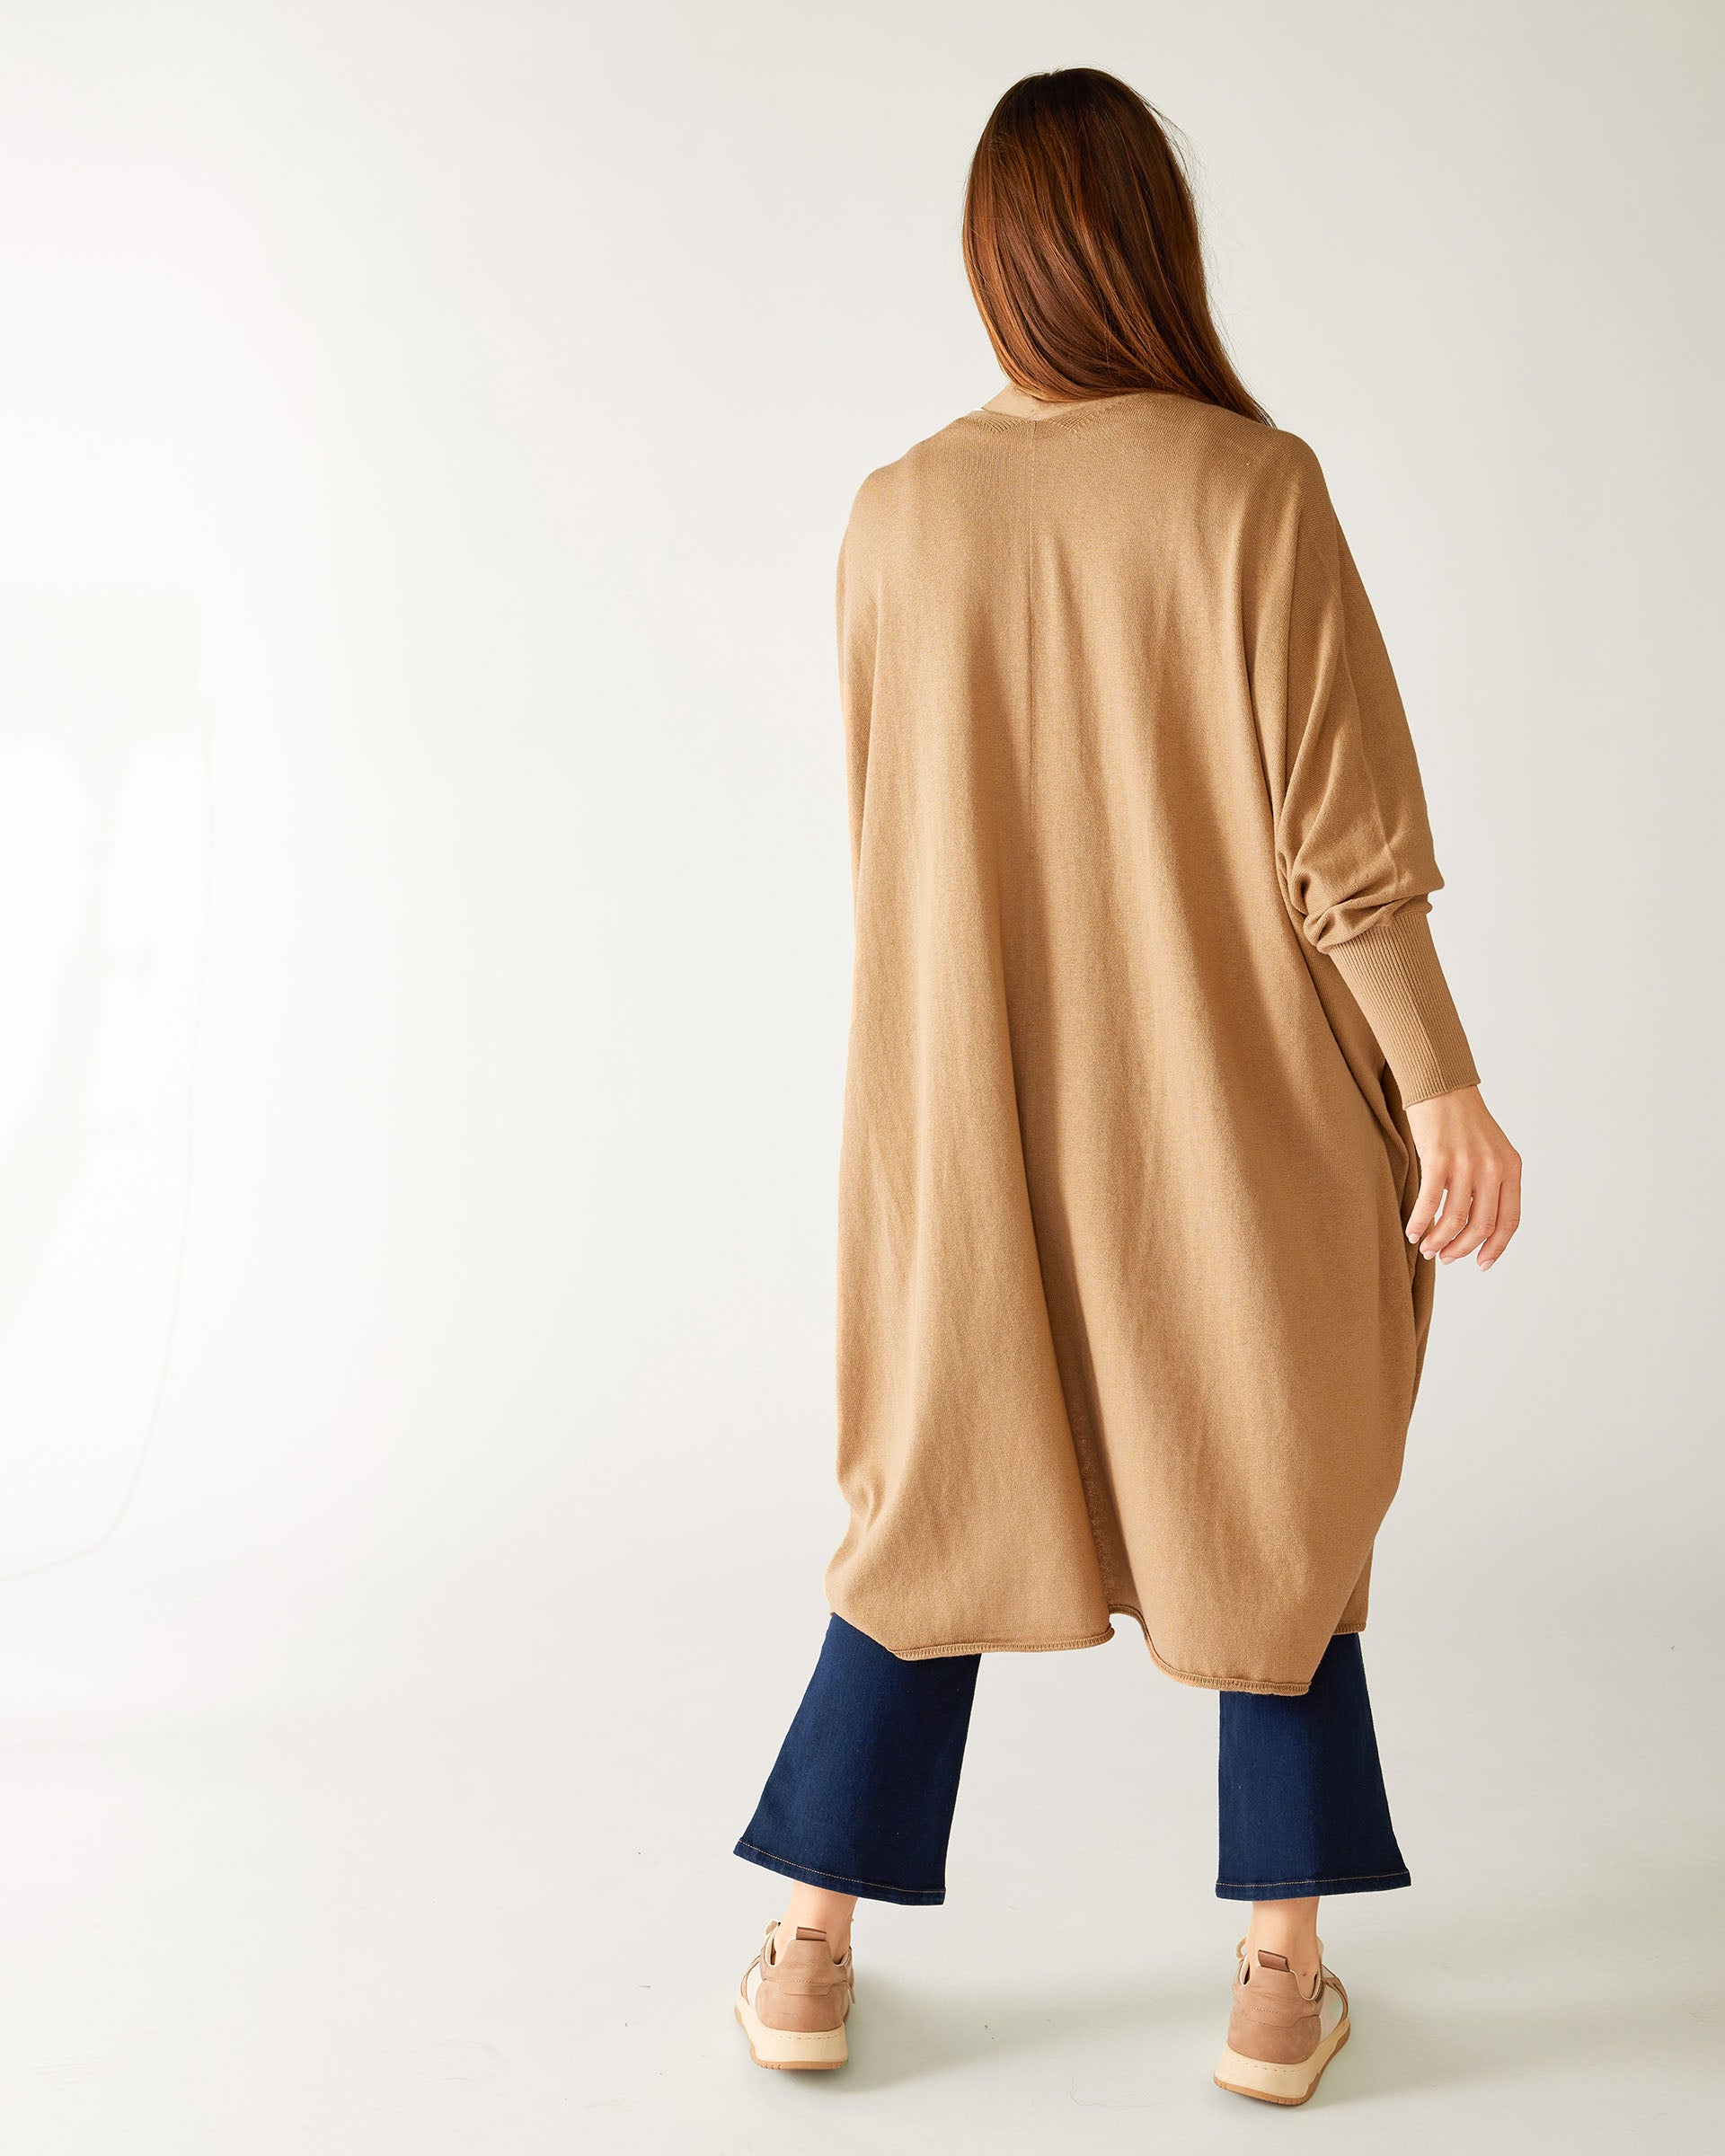 rear view of woman wearing camel colored mersea long kimono sweater in cotton cashmere blend knit